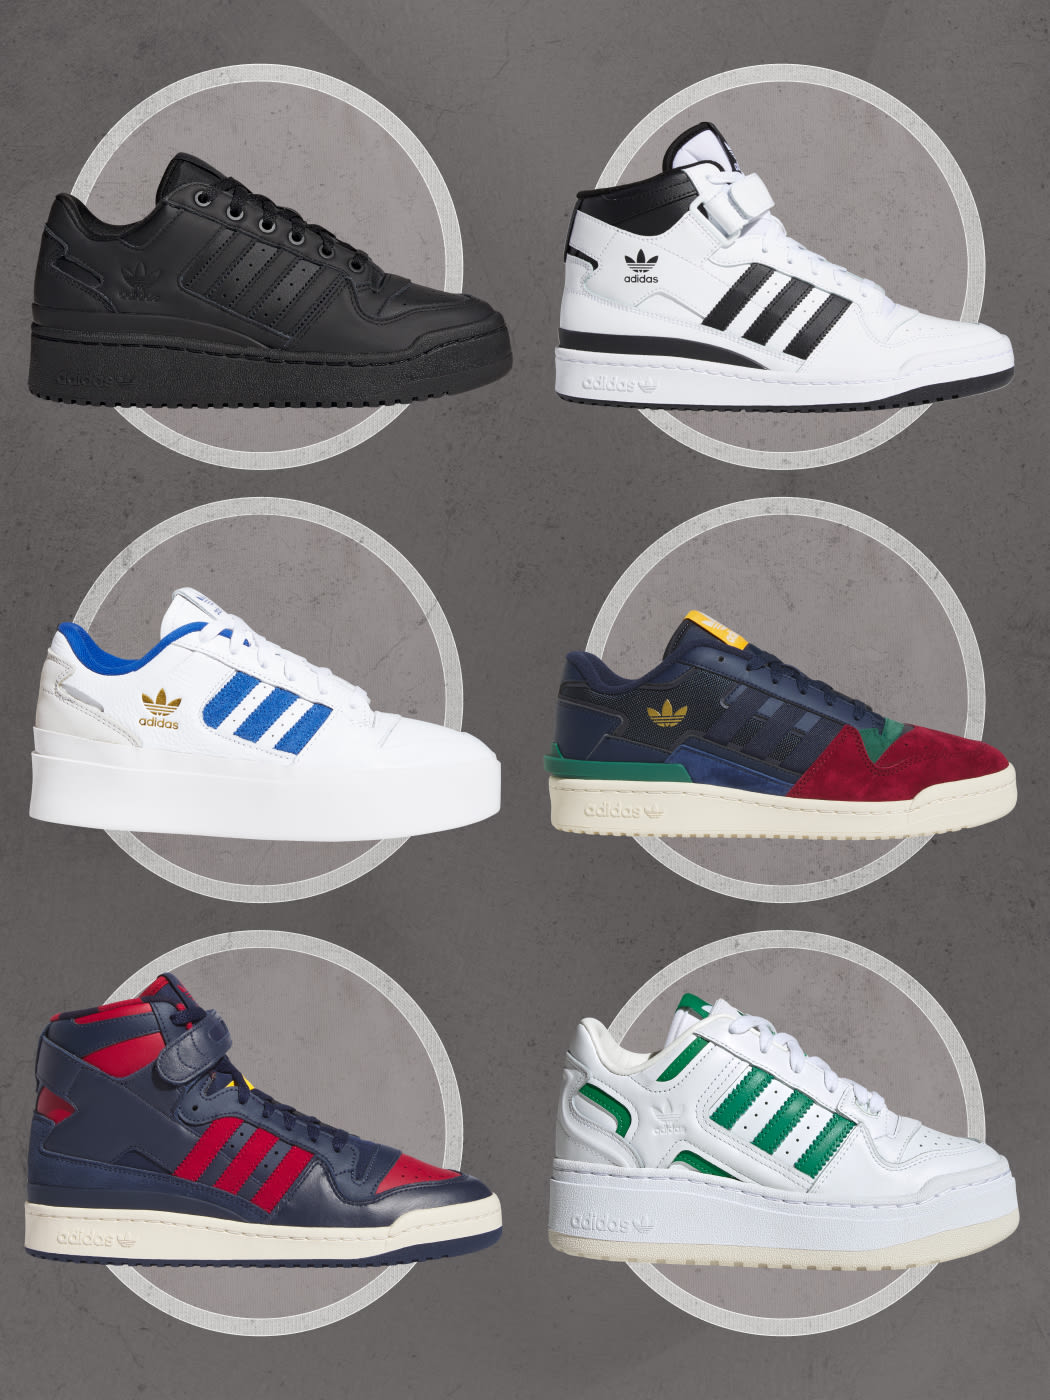 The Definitive adidas Size Guide